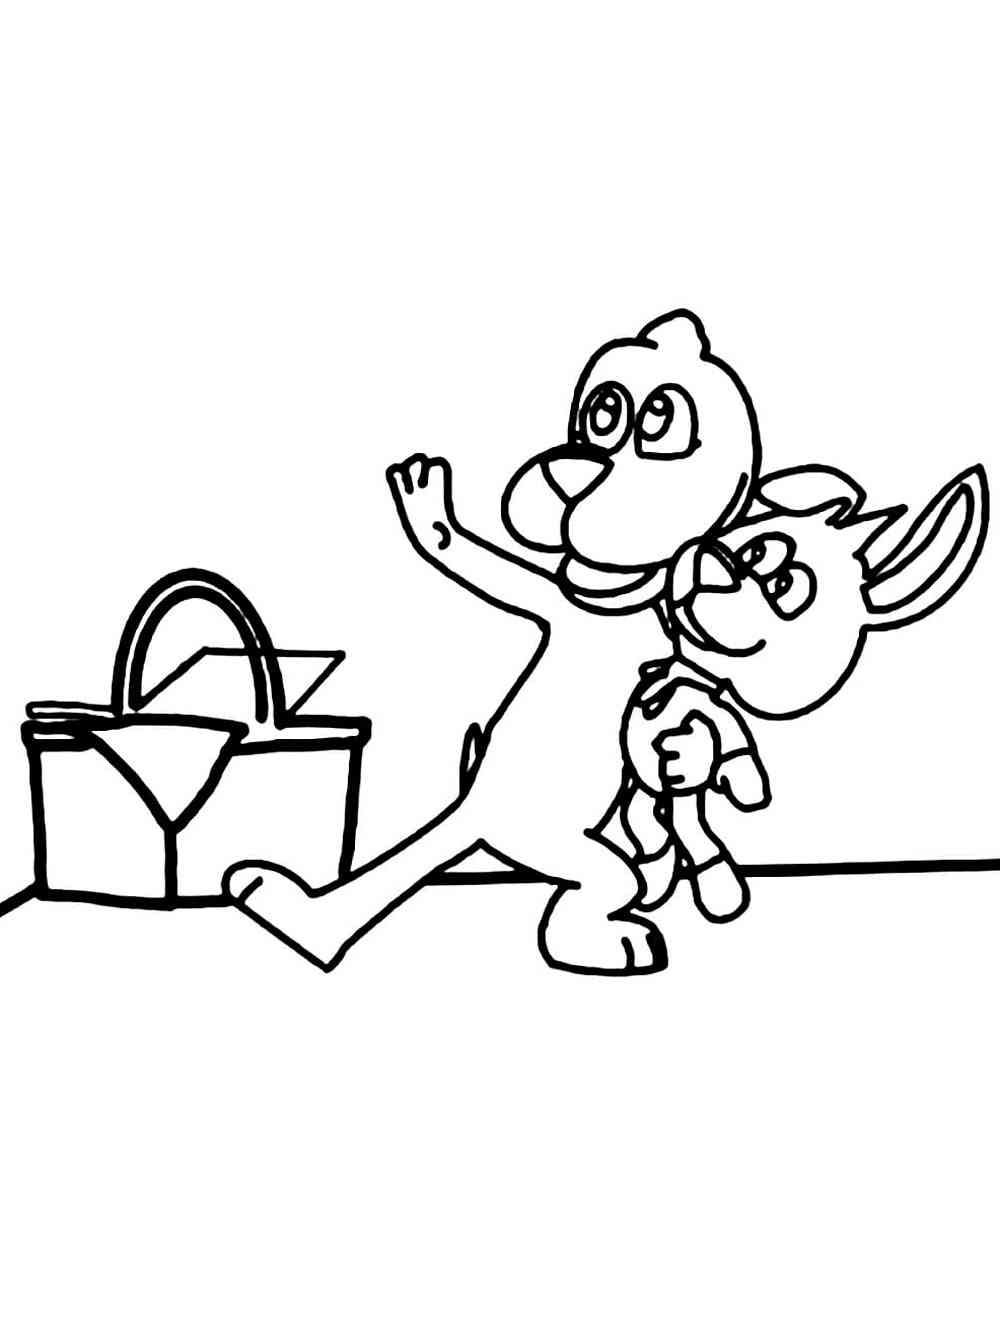 Go, Dog, Go 1 coloring page